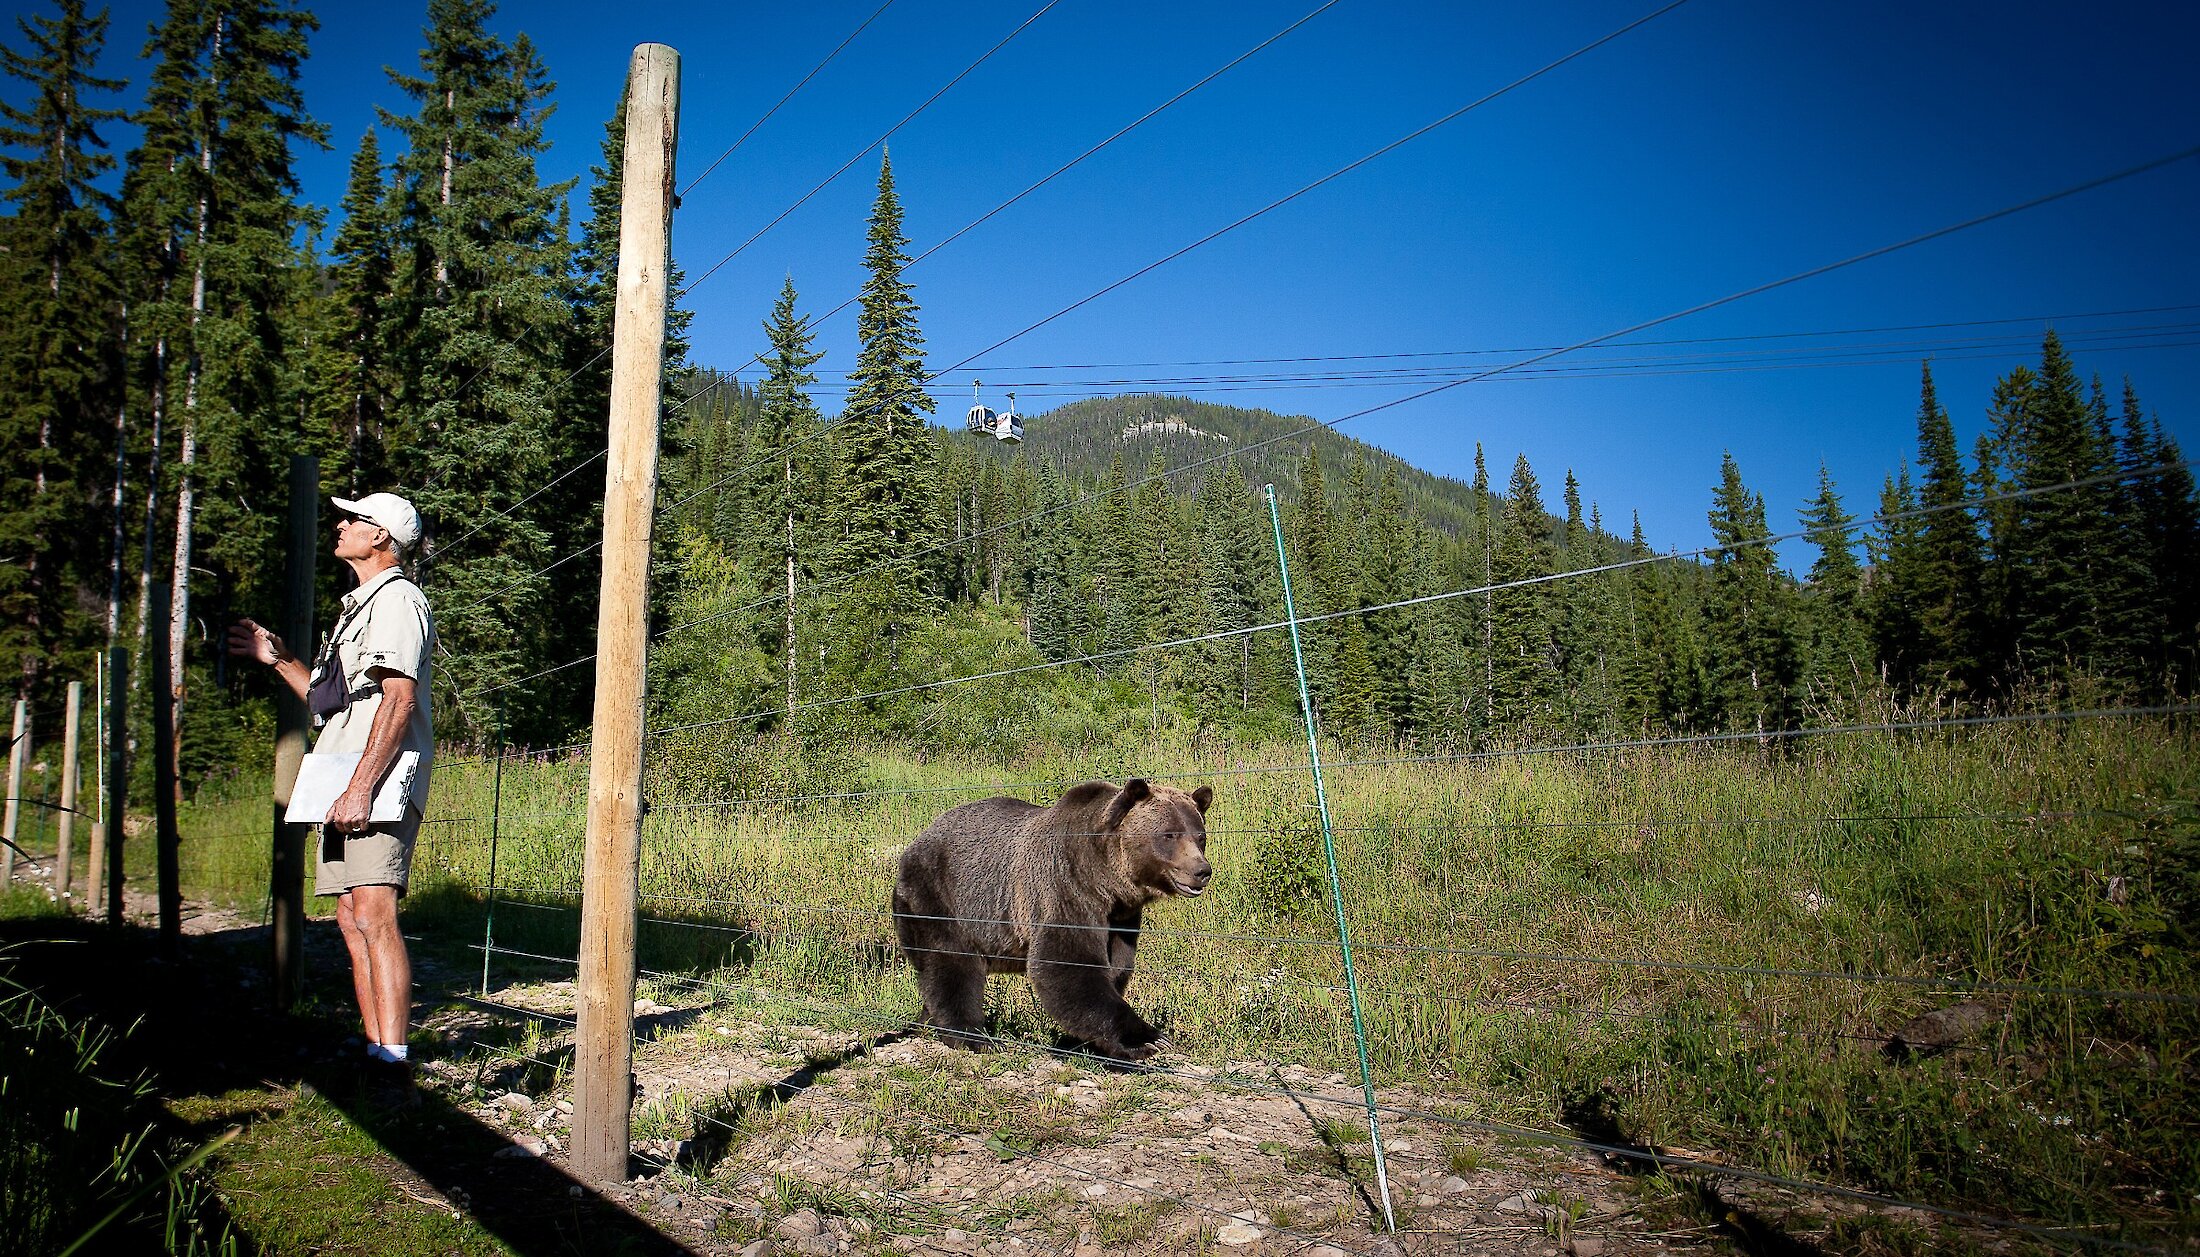 Boo the Grizzly Bear in refuge at Kicking Horse Mountain